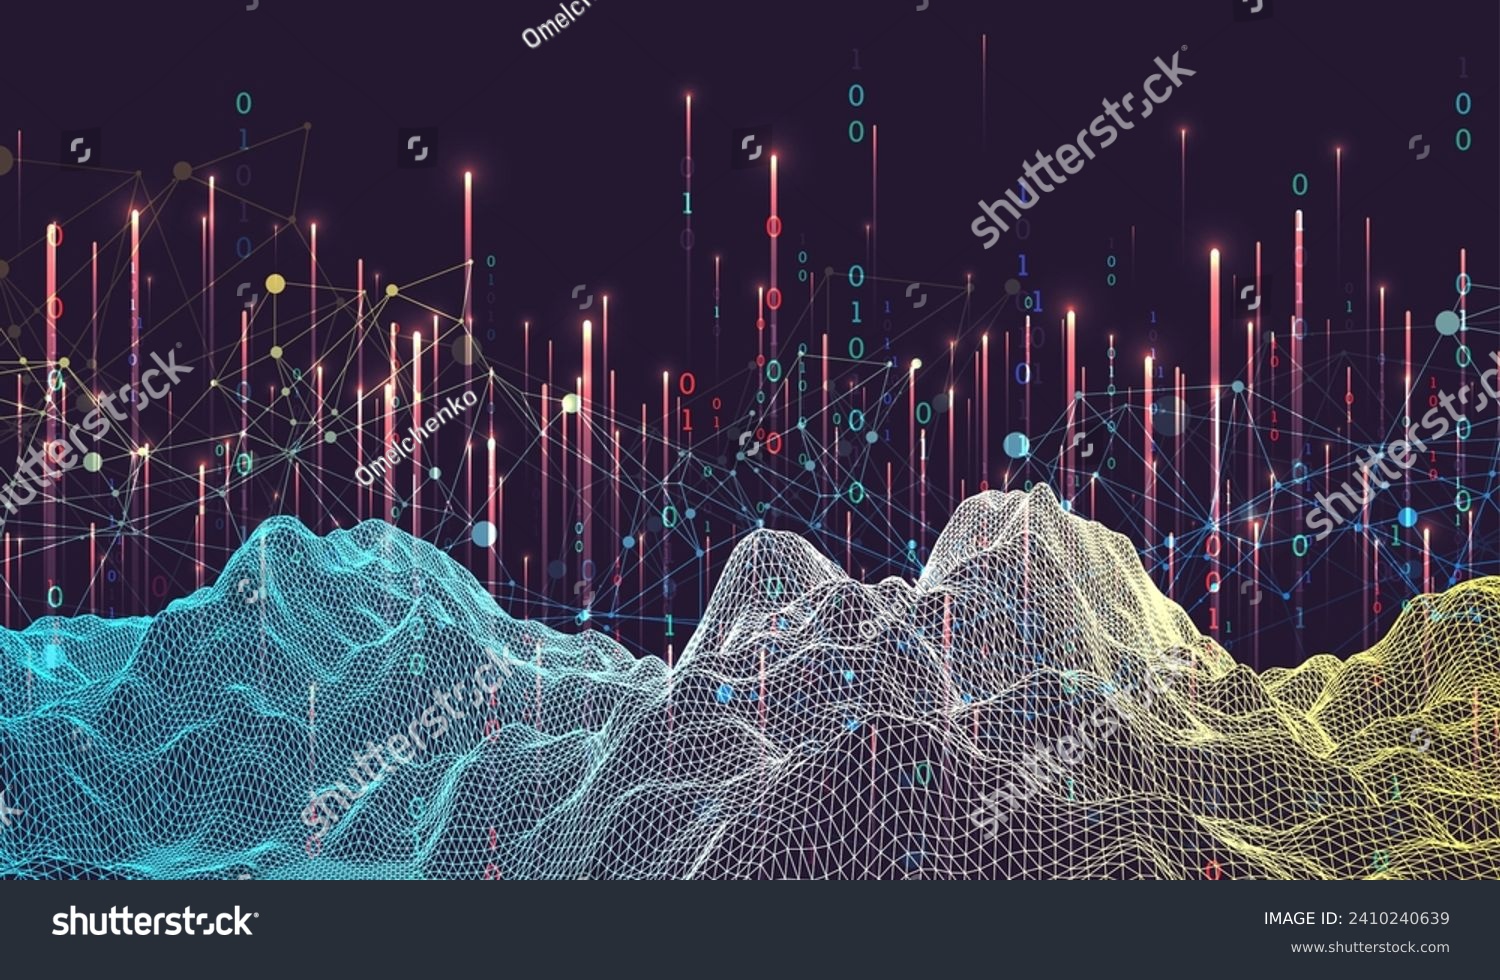 Big Data. Abstract digital futuristic wireframe vector illustration on technology background. Data mining and management concept. Hand drawn art. #2410240639